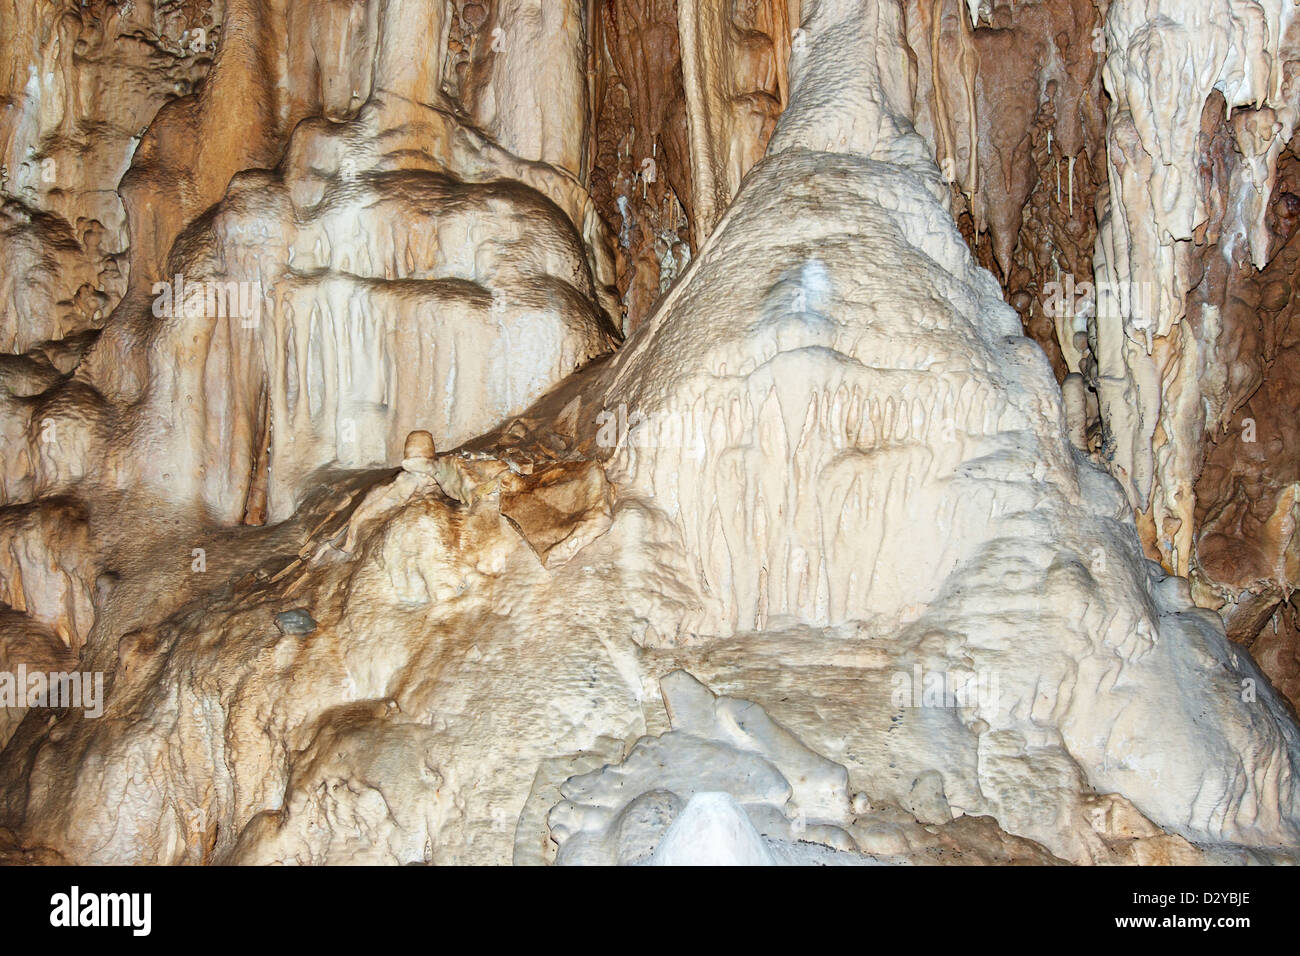 Javorice caves - stalactite formations Stock Photo